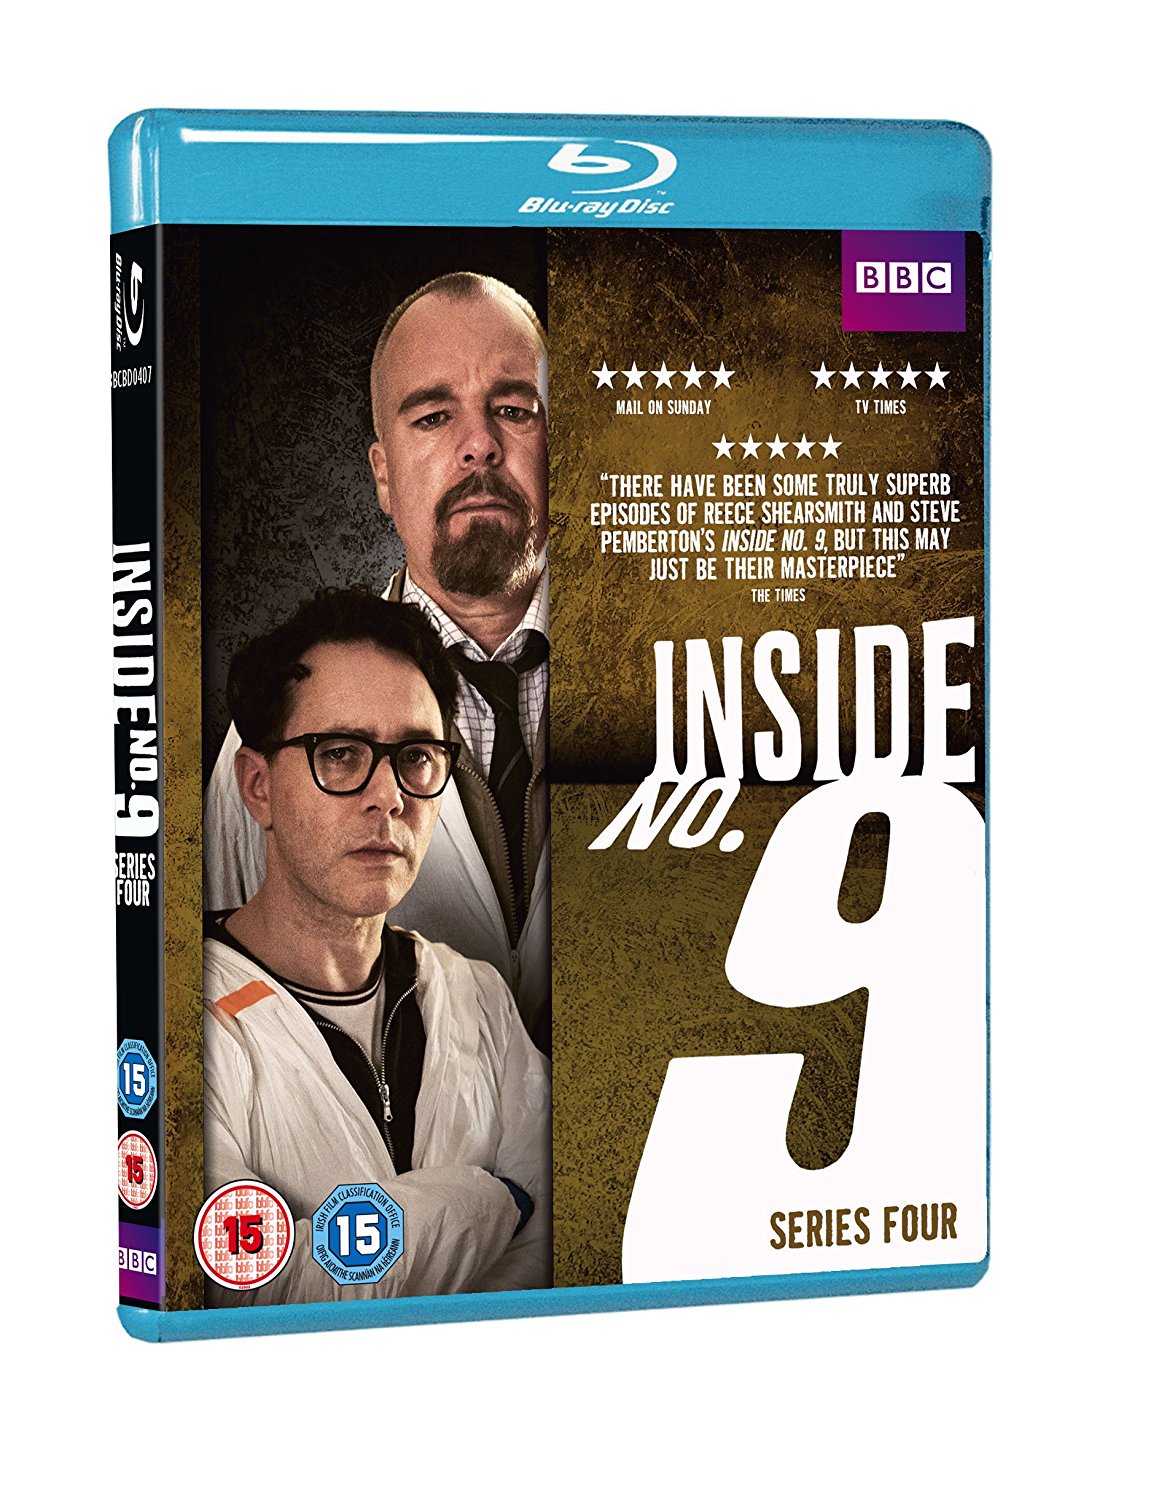 Inside No. 9 Series 4 review: does the anthology series continue to wow?